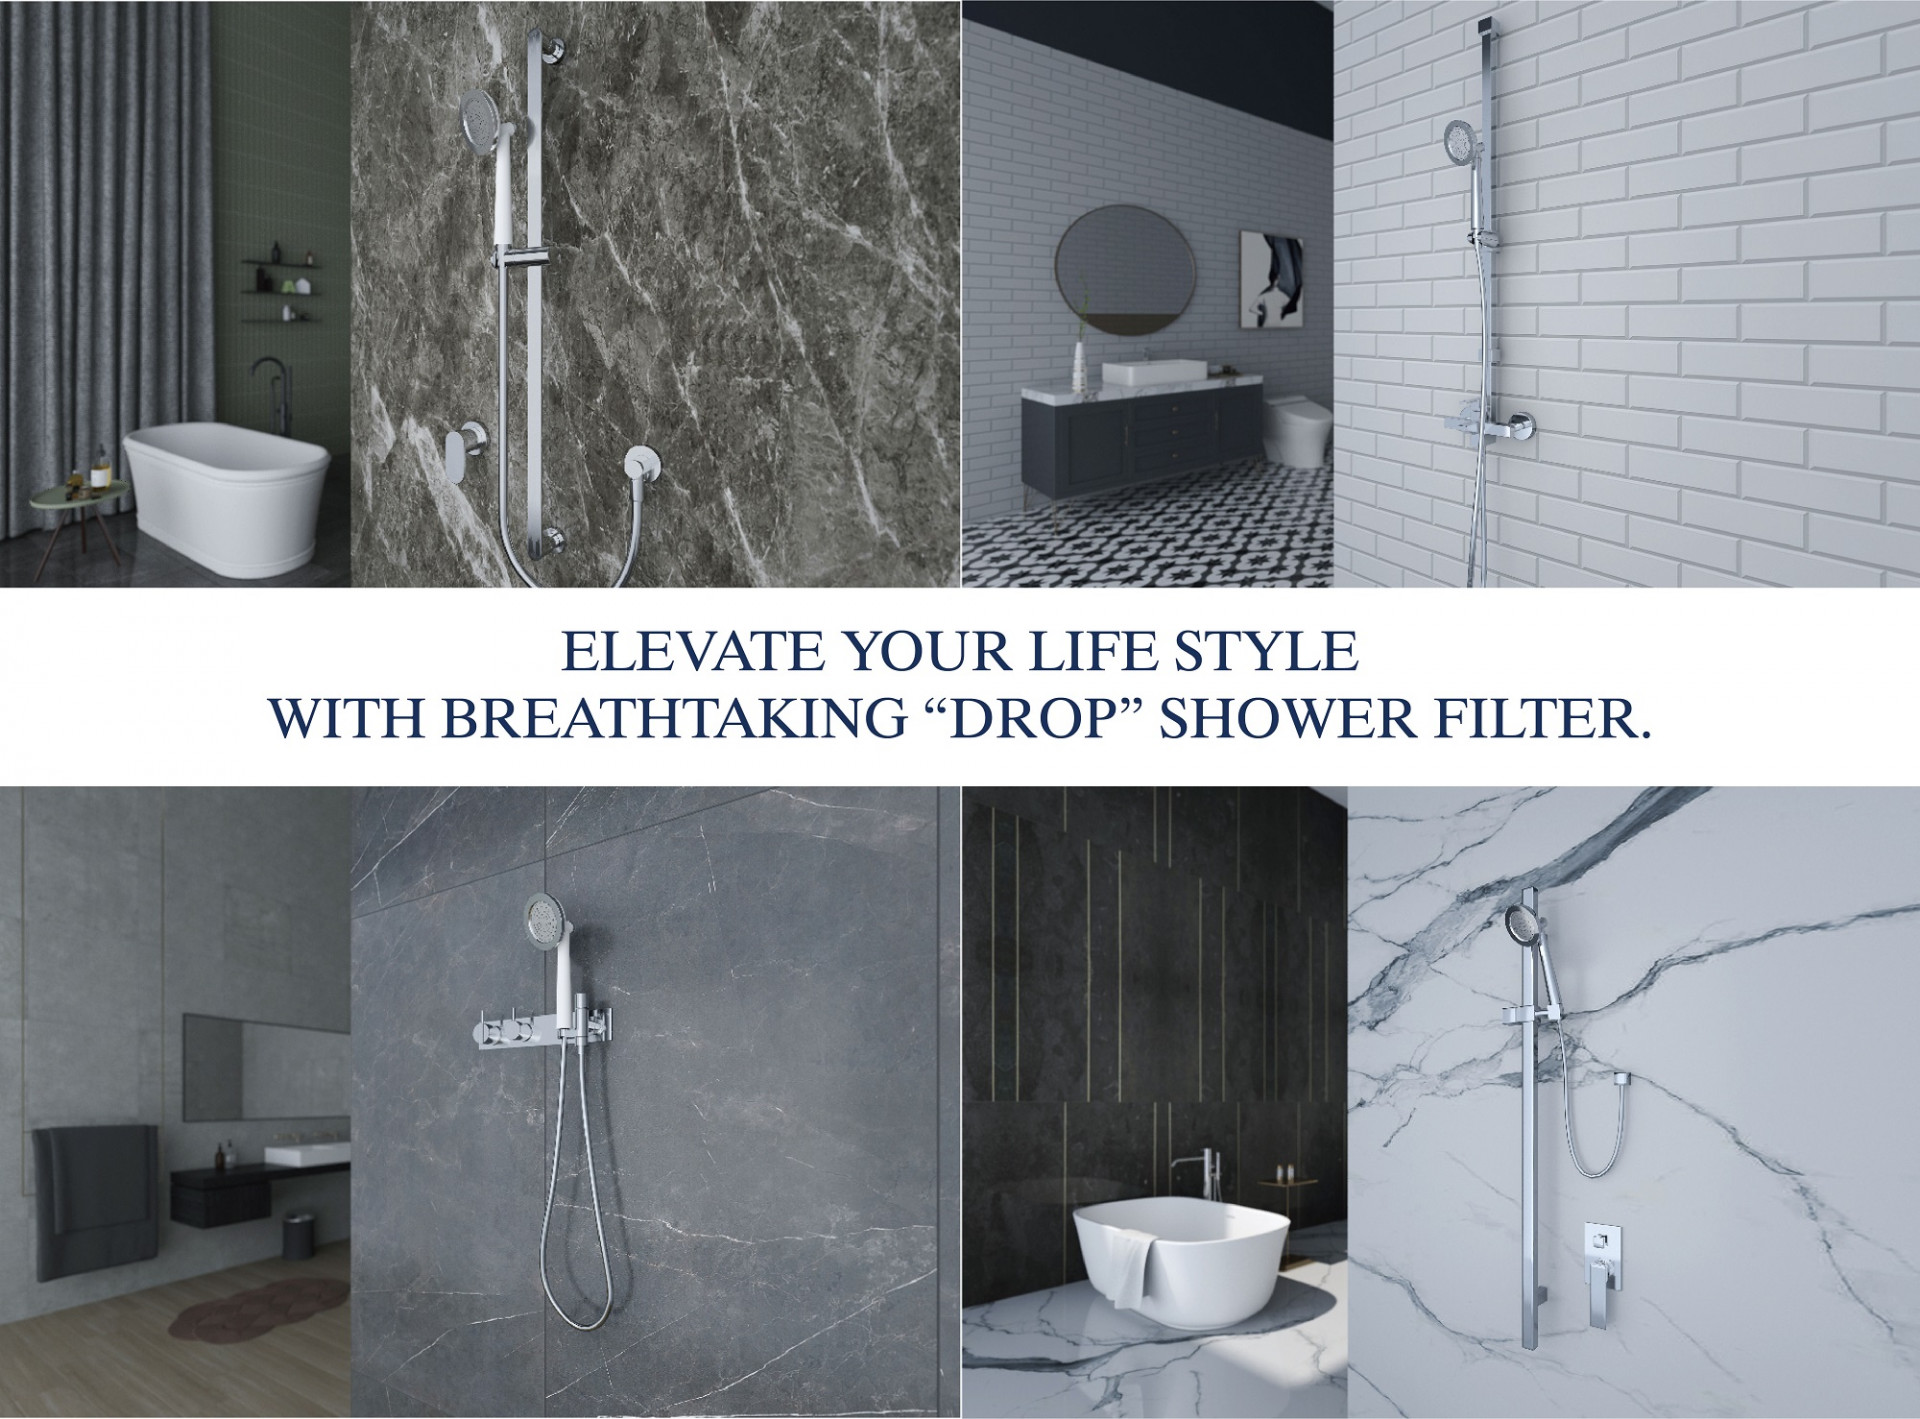 HAND SHOWER FILTER ELEVATE YOUR LIFE STYLE WITH BREATHTAKING